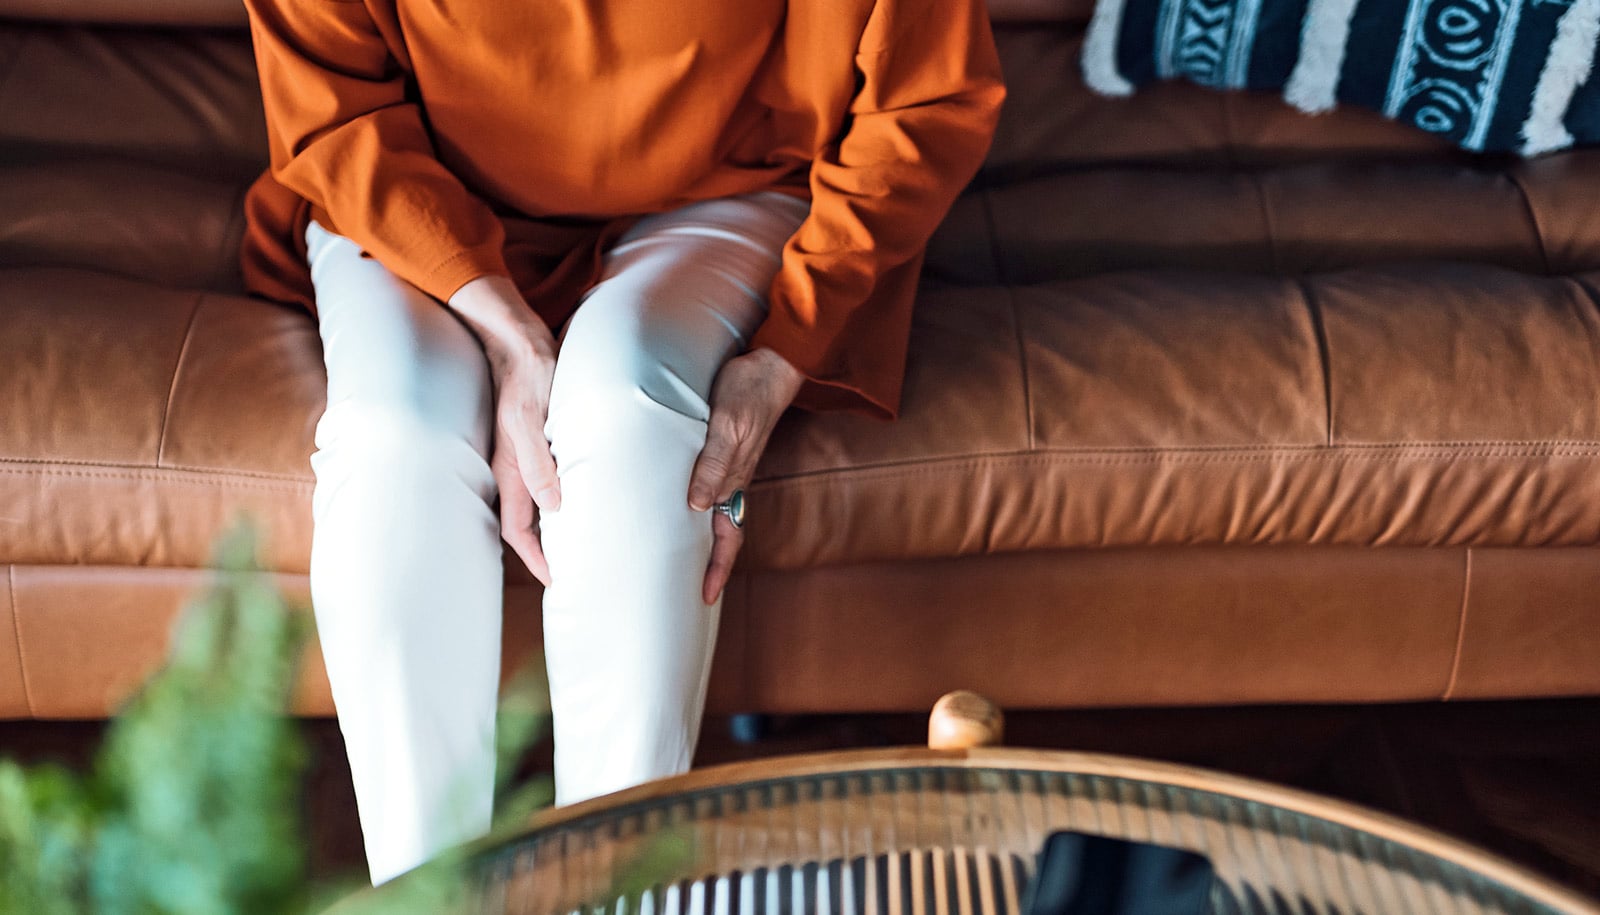 A person sitting on a couch holds their knee in pain.